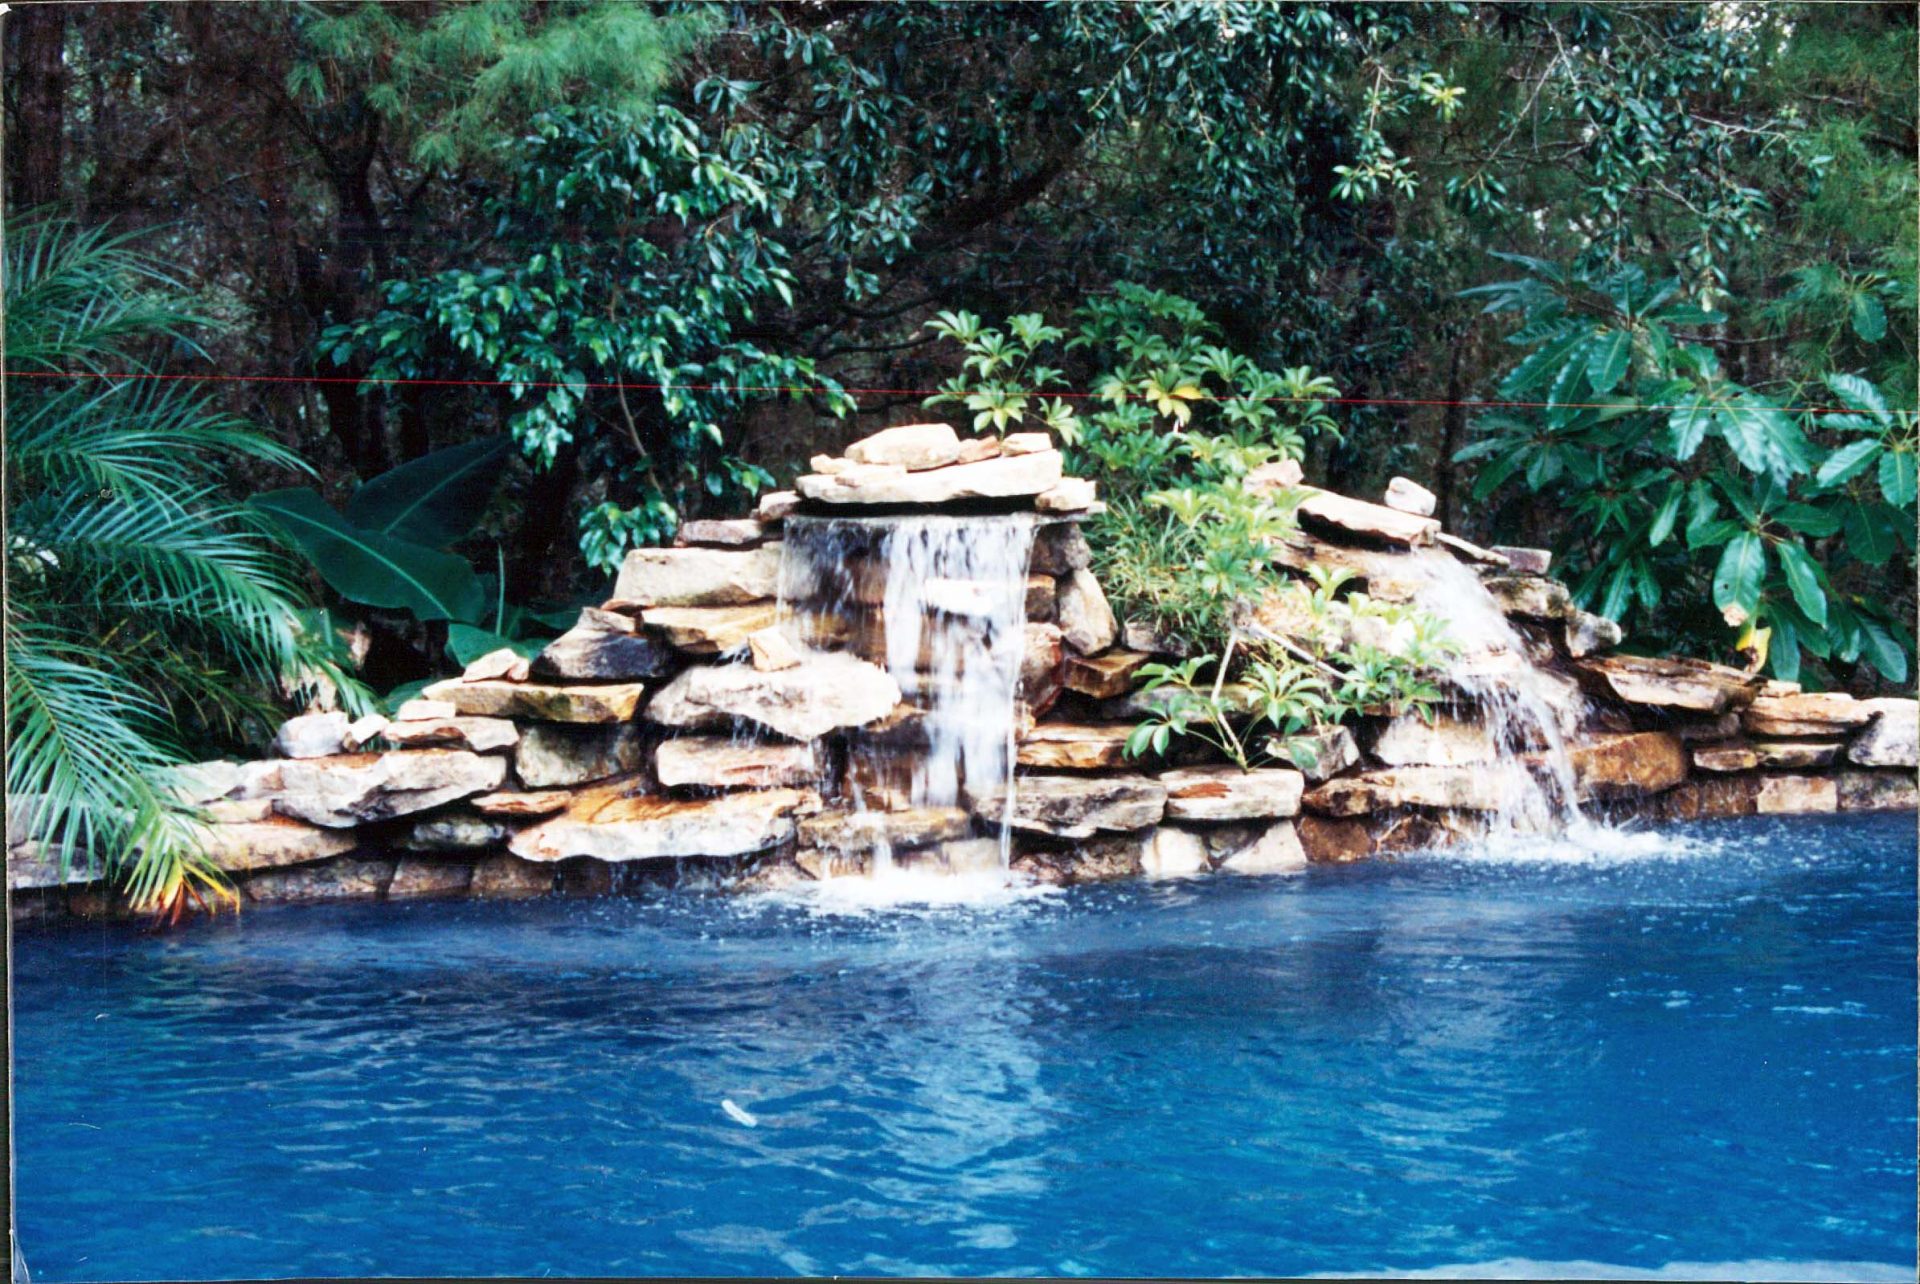 Custom Pool Waterfall by Waterscapes Inc.